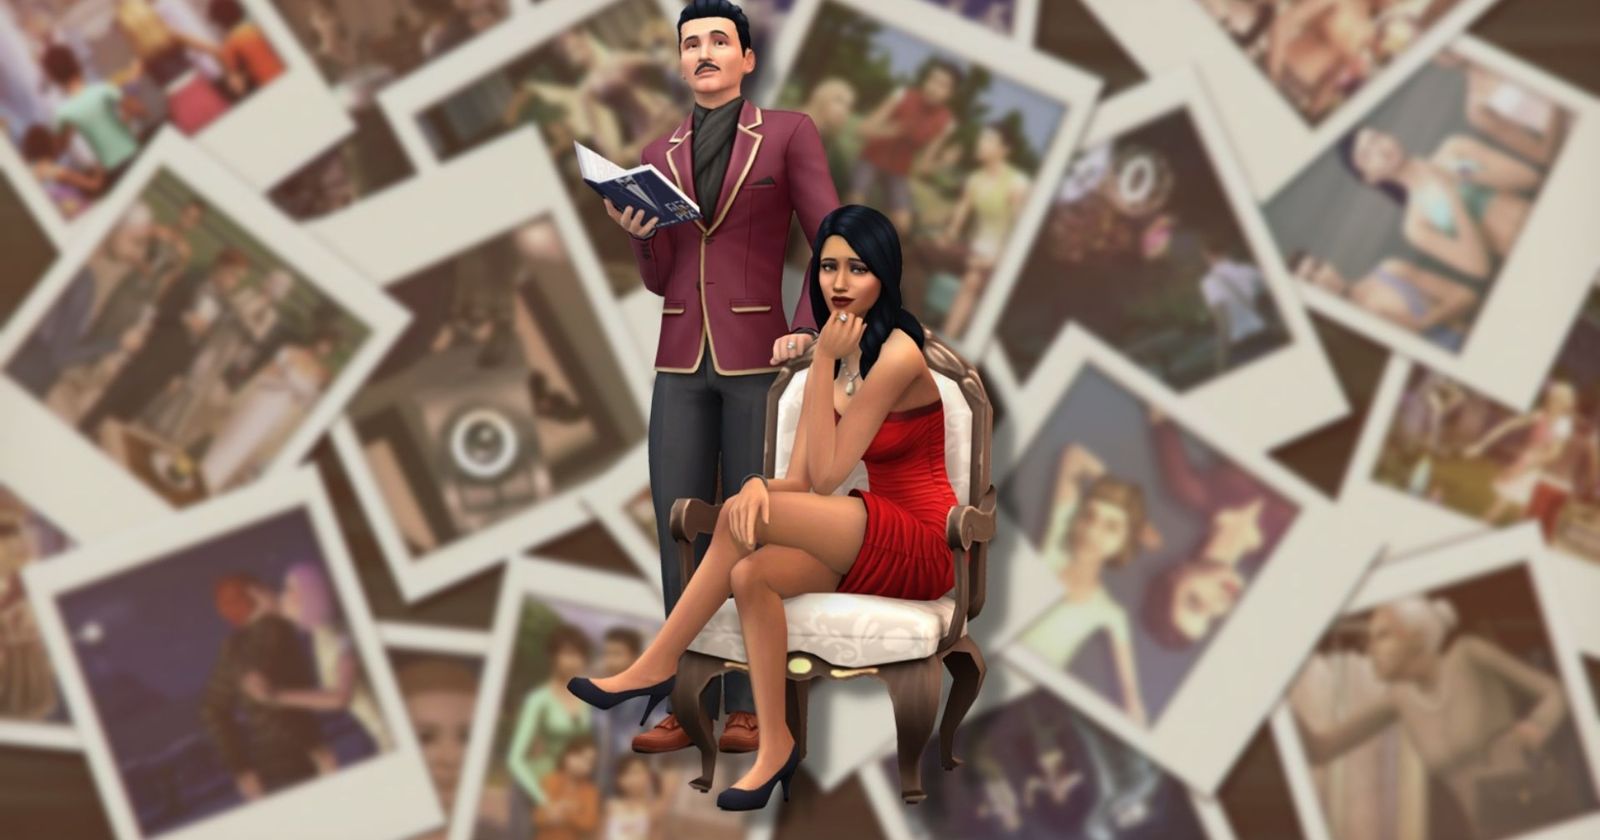 Sims 4 Relationship Cheats: Romance and Friendship